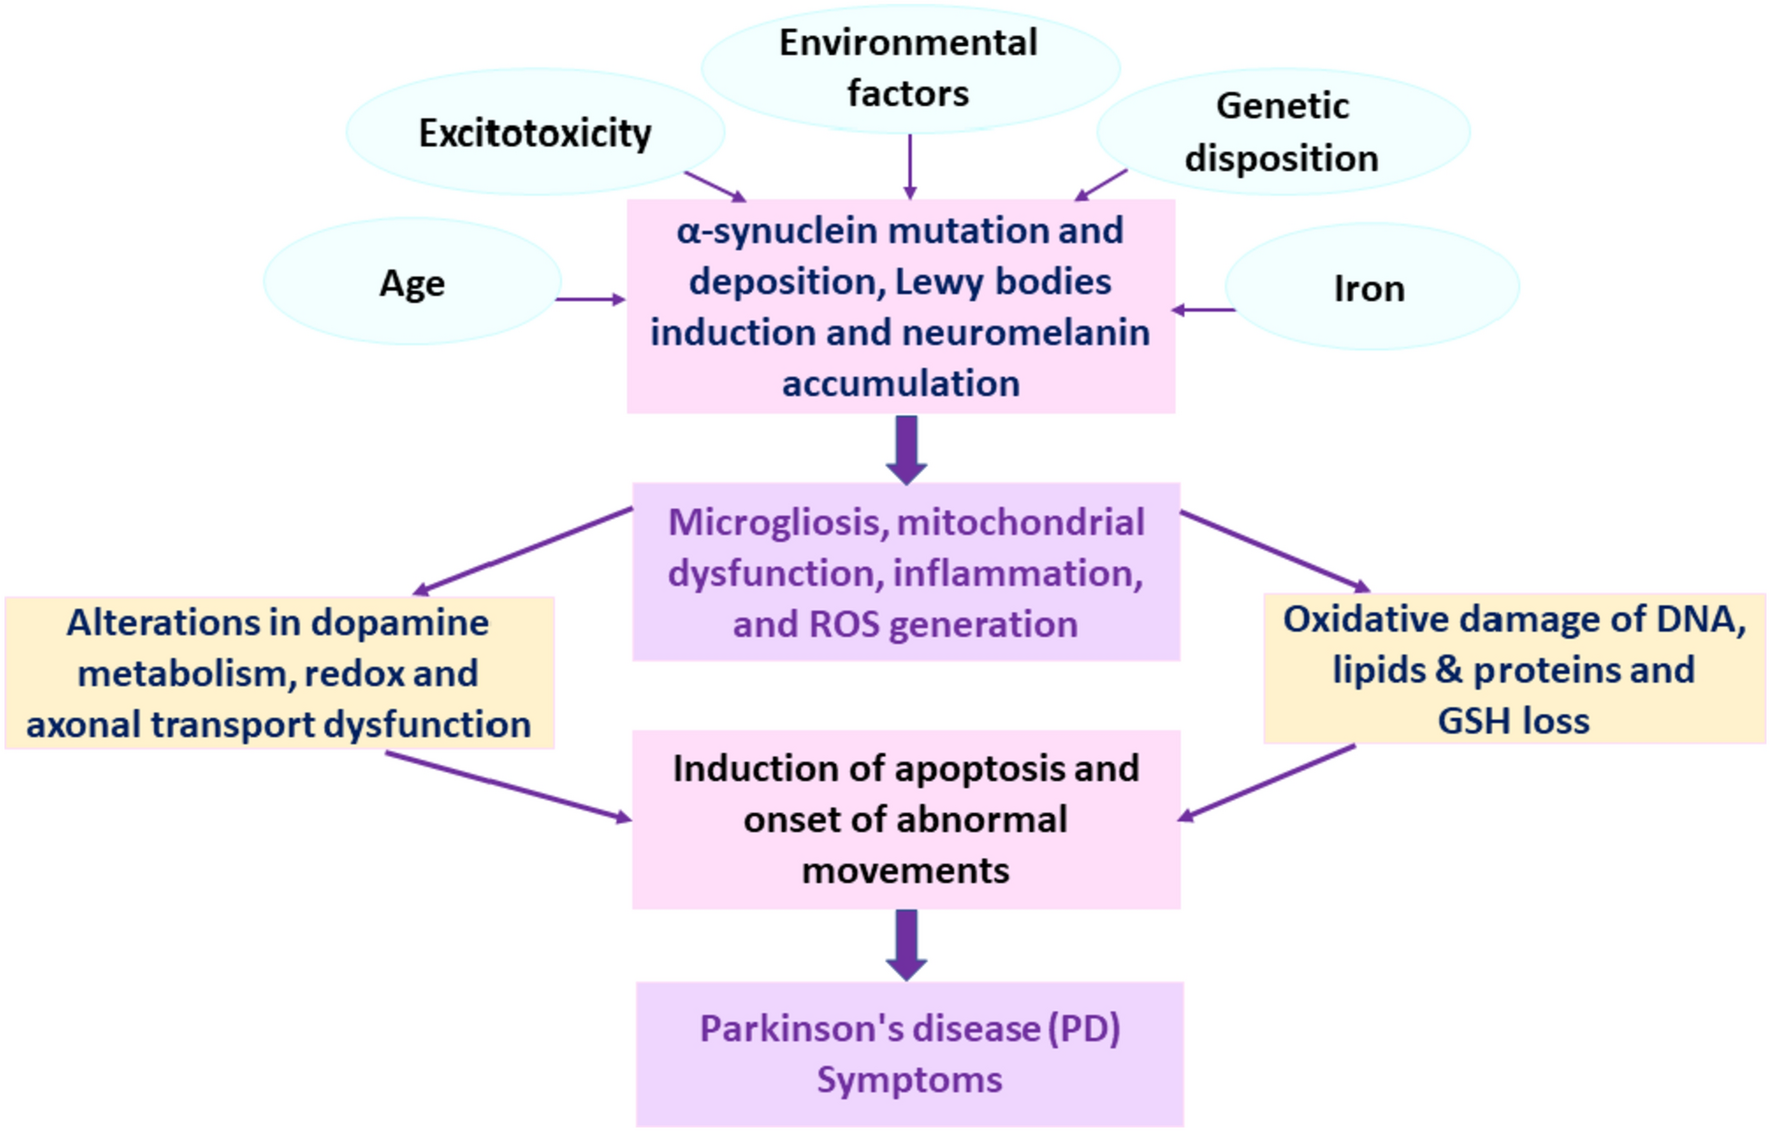 The effects of cholesterol and statins on Parkinson’s neuropathology: a narrative review